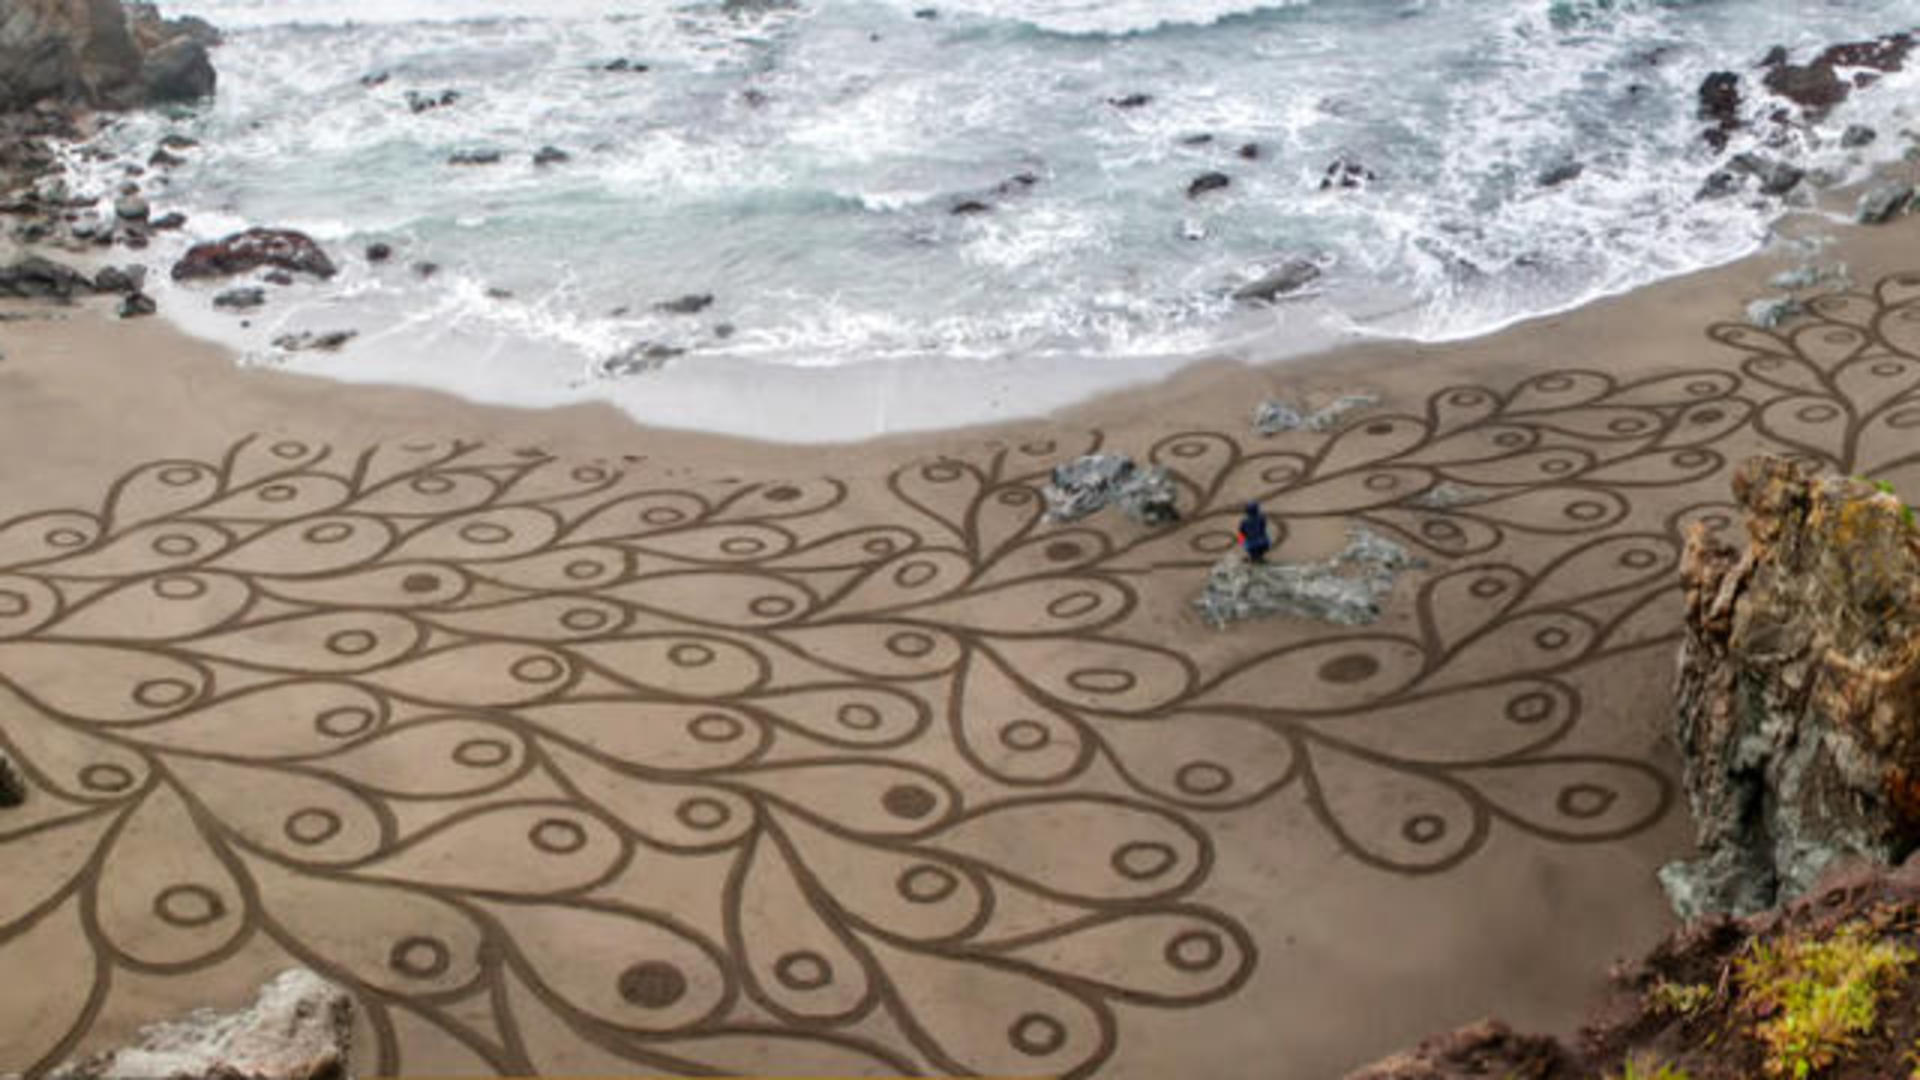 California sand artist brings moments of Zen to storm-battered coast